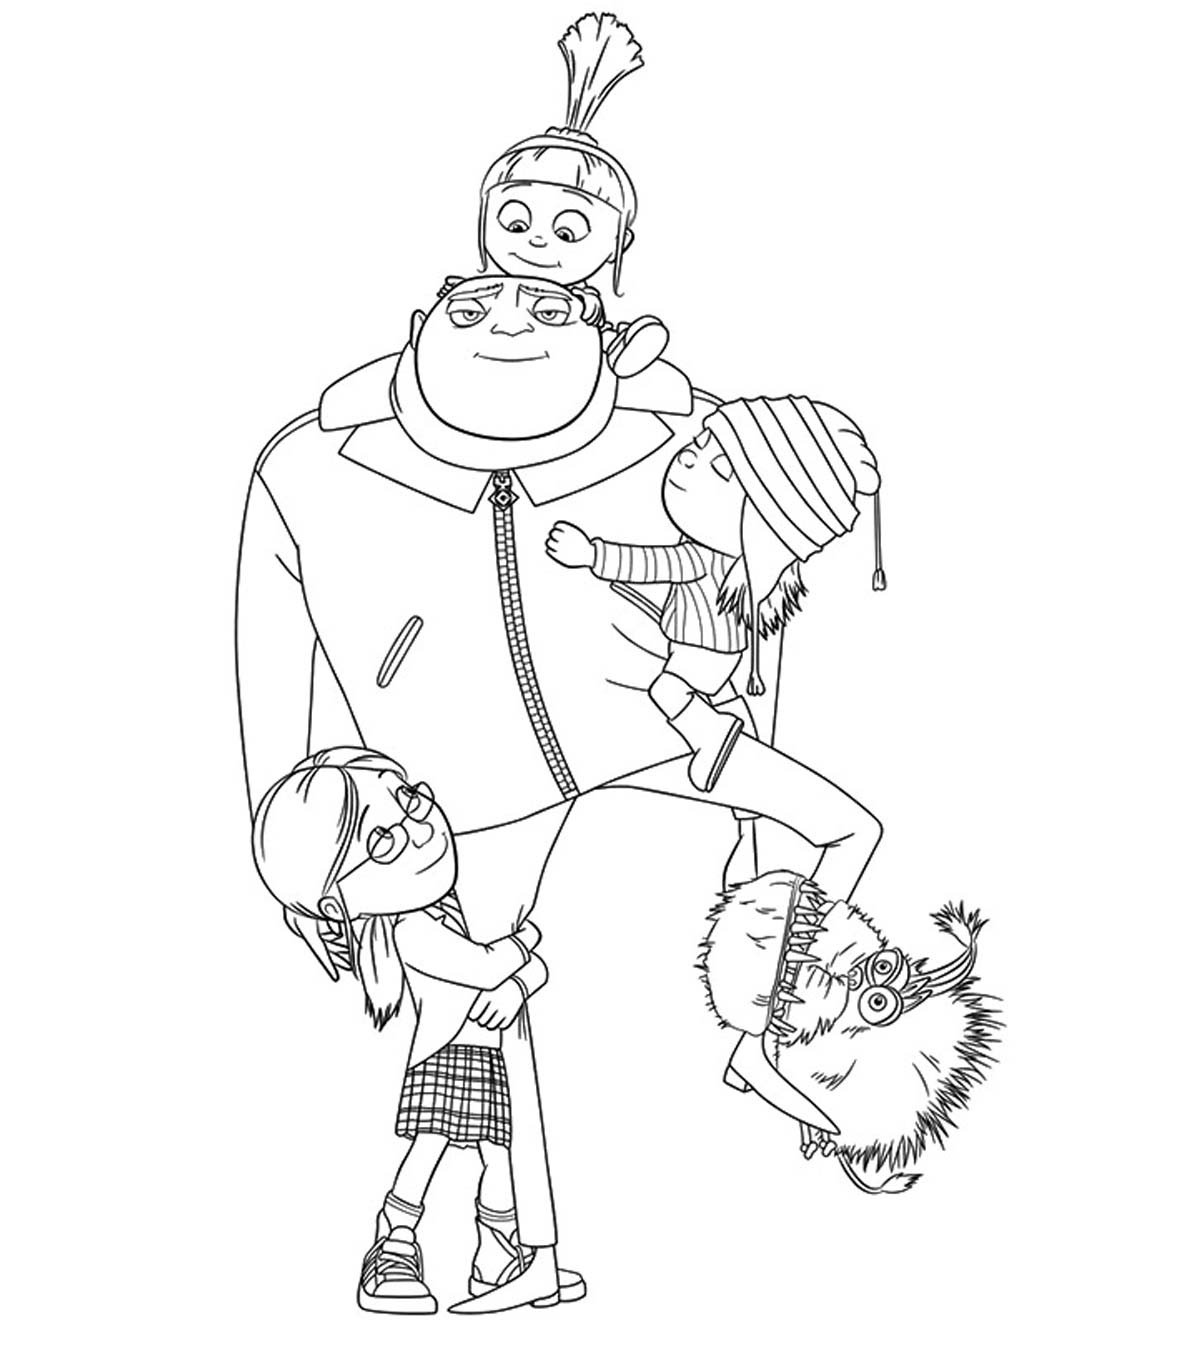 Top 35 'Despicable Me 2' Coloring Pages For Your Naughty Kids